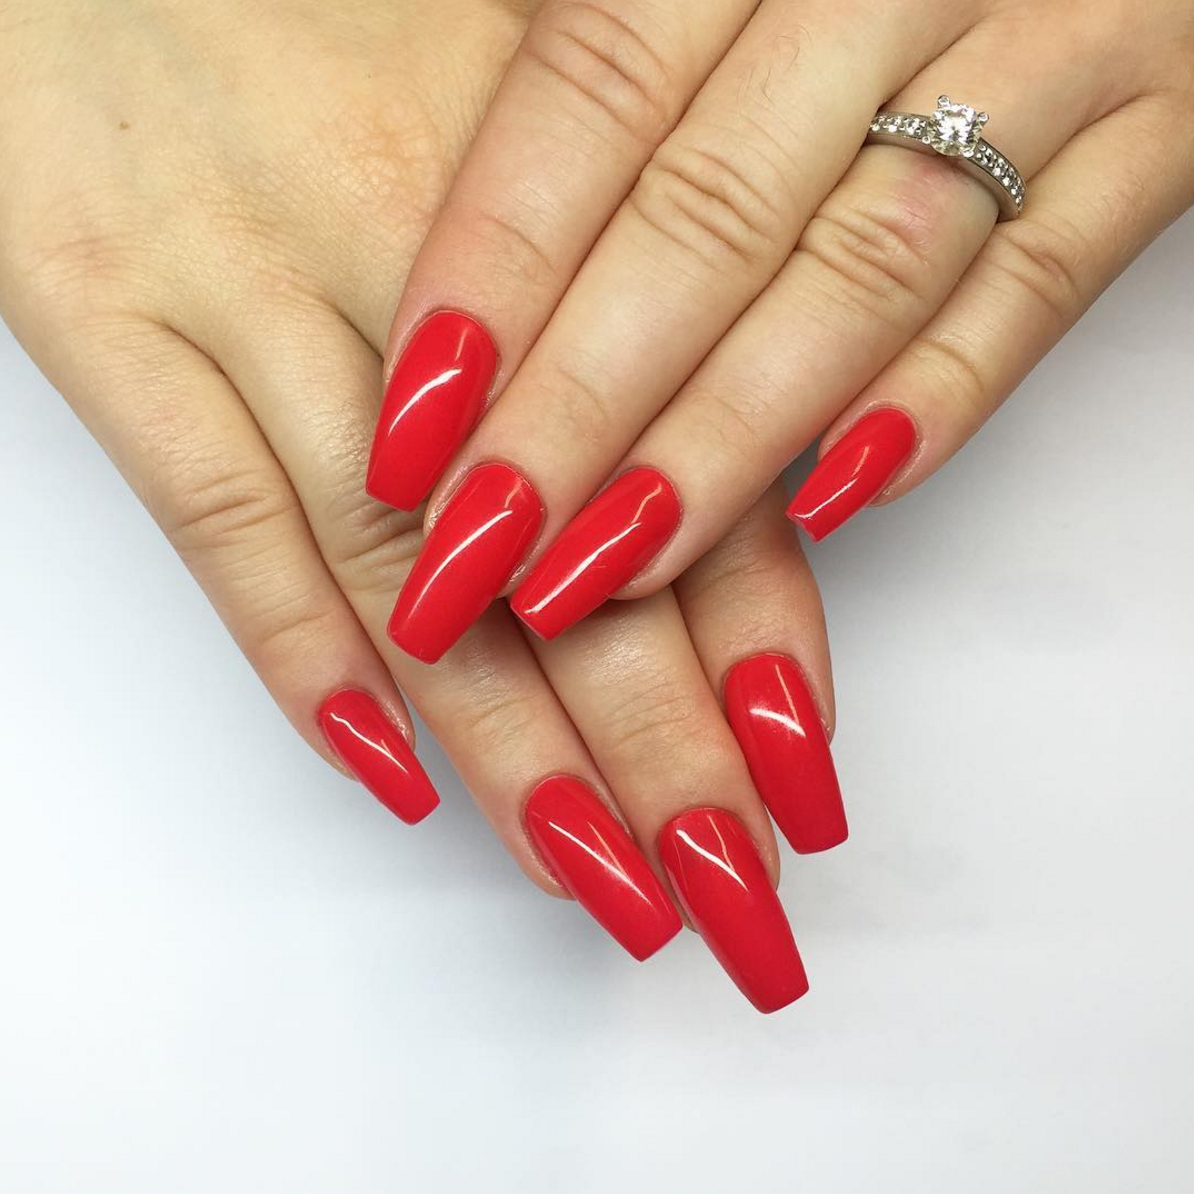 red-nails